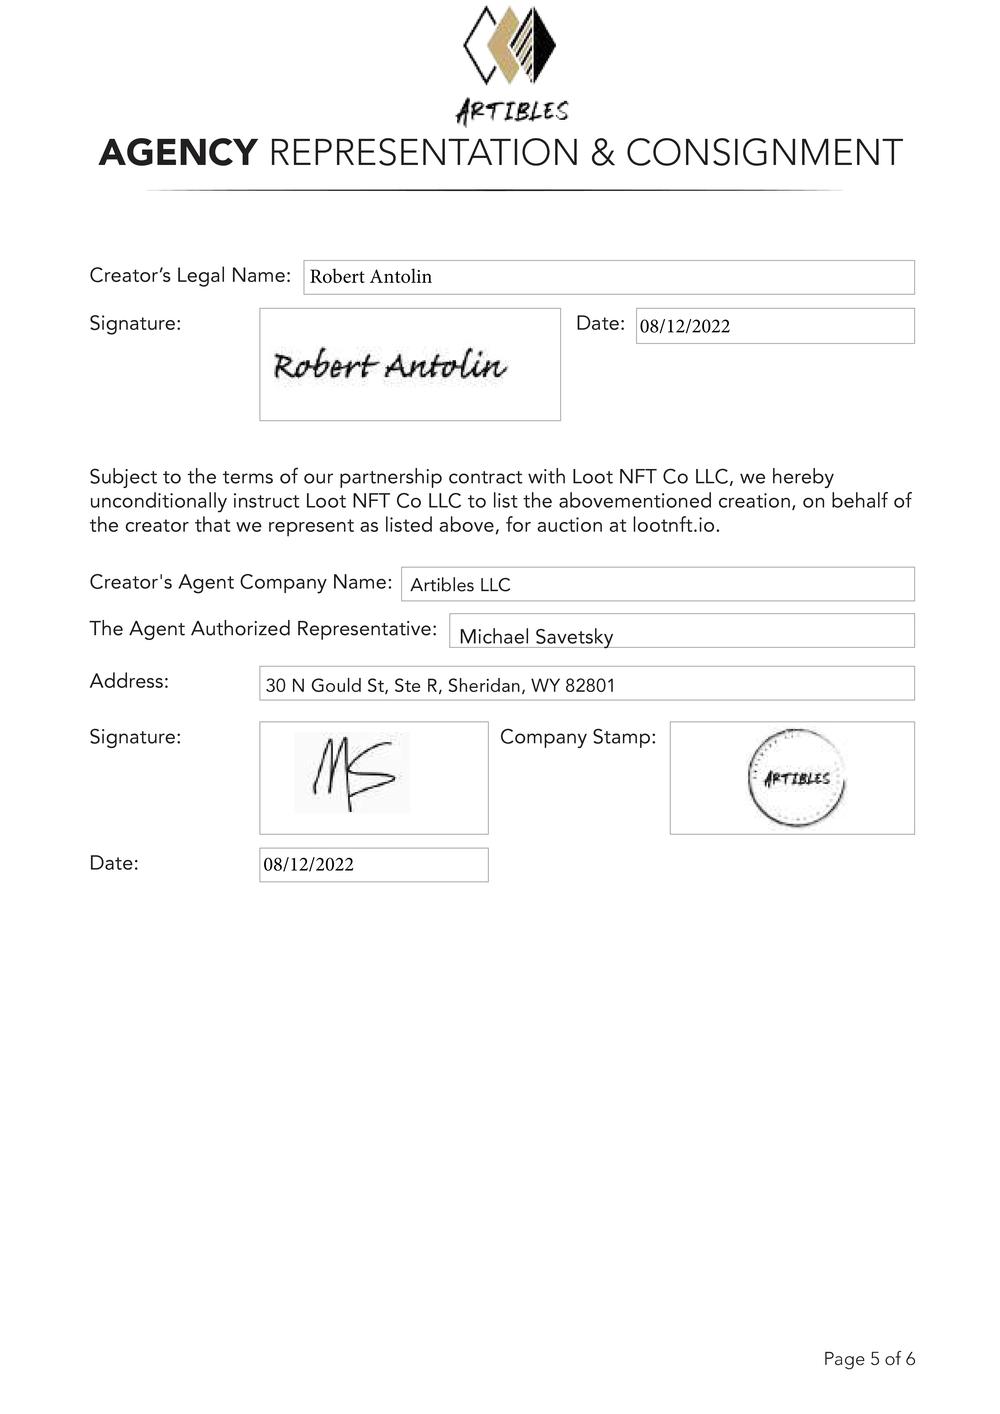 Certificate of Authenticity and Consignment - Relay.pdf